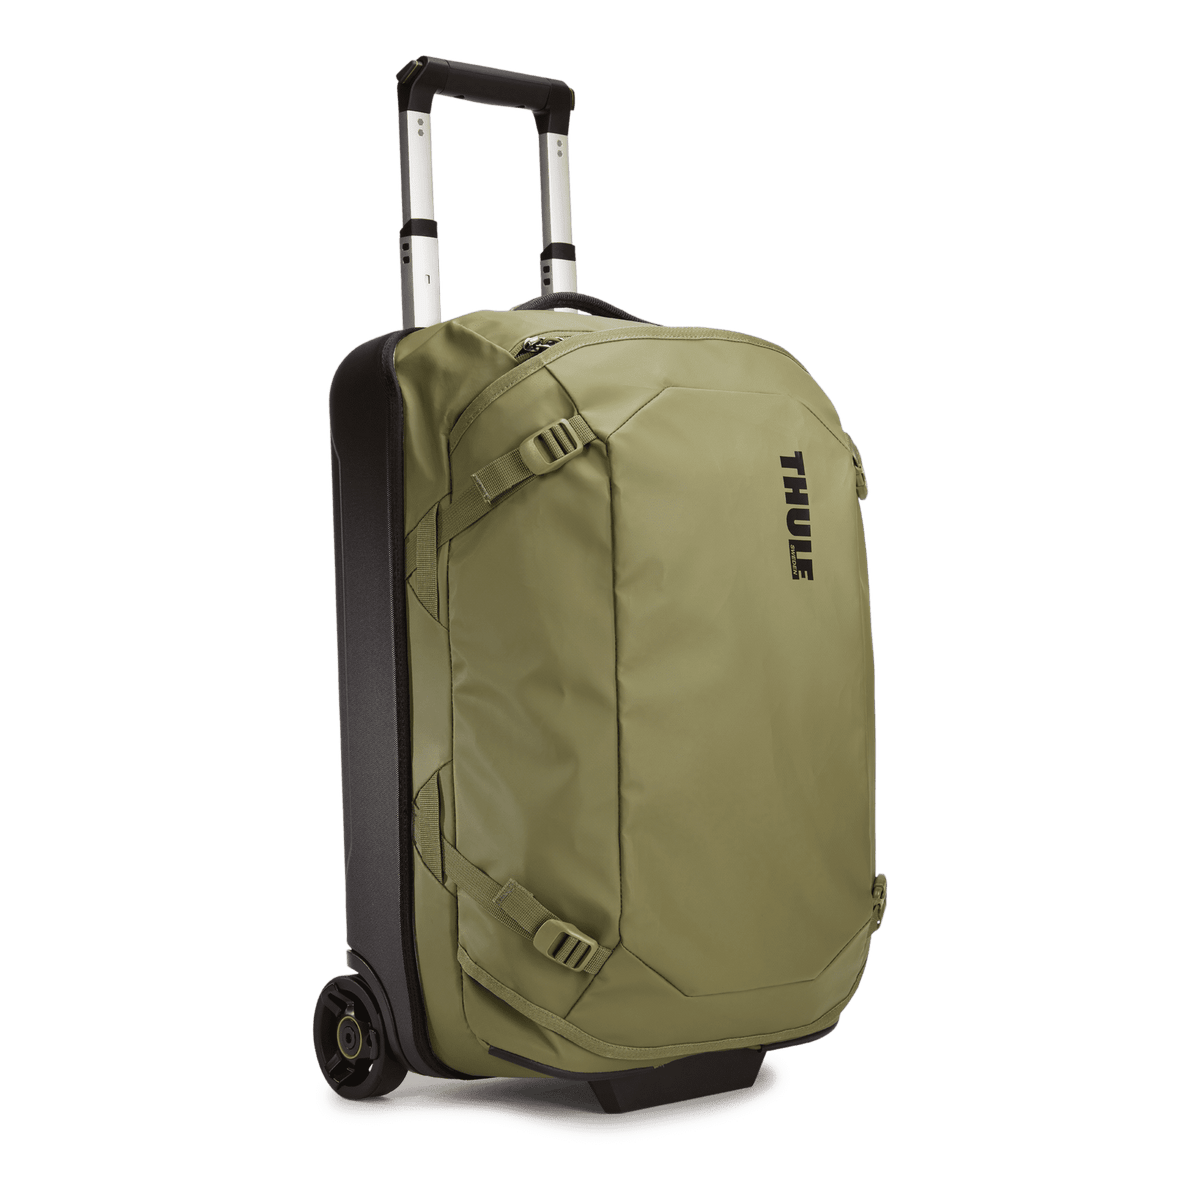 Thule Chasm Carry On Wheeled Duffel Bag 40L